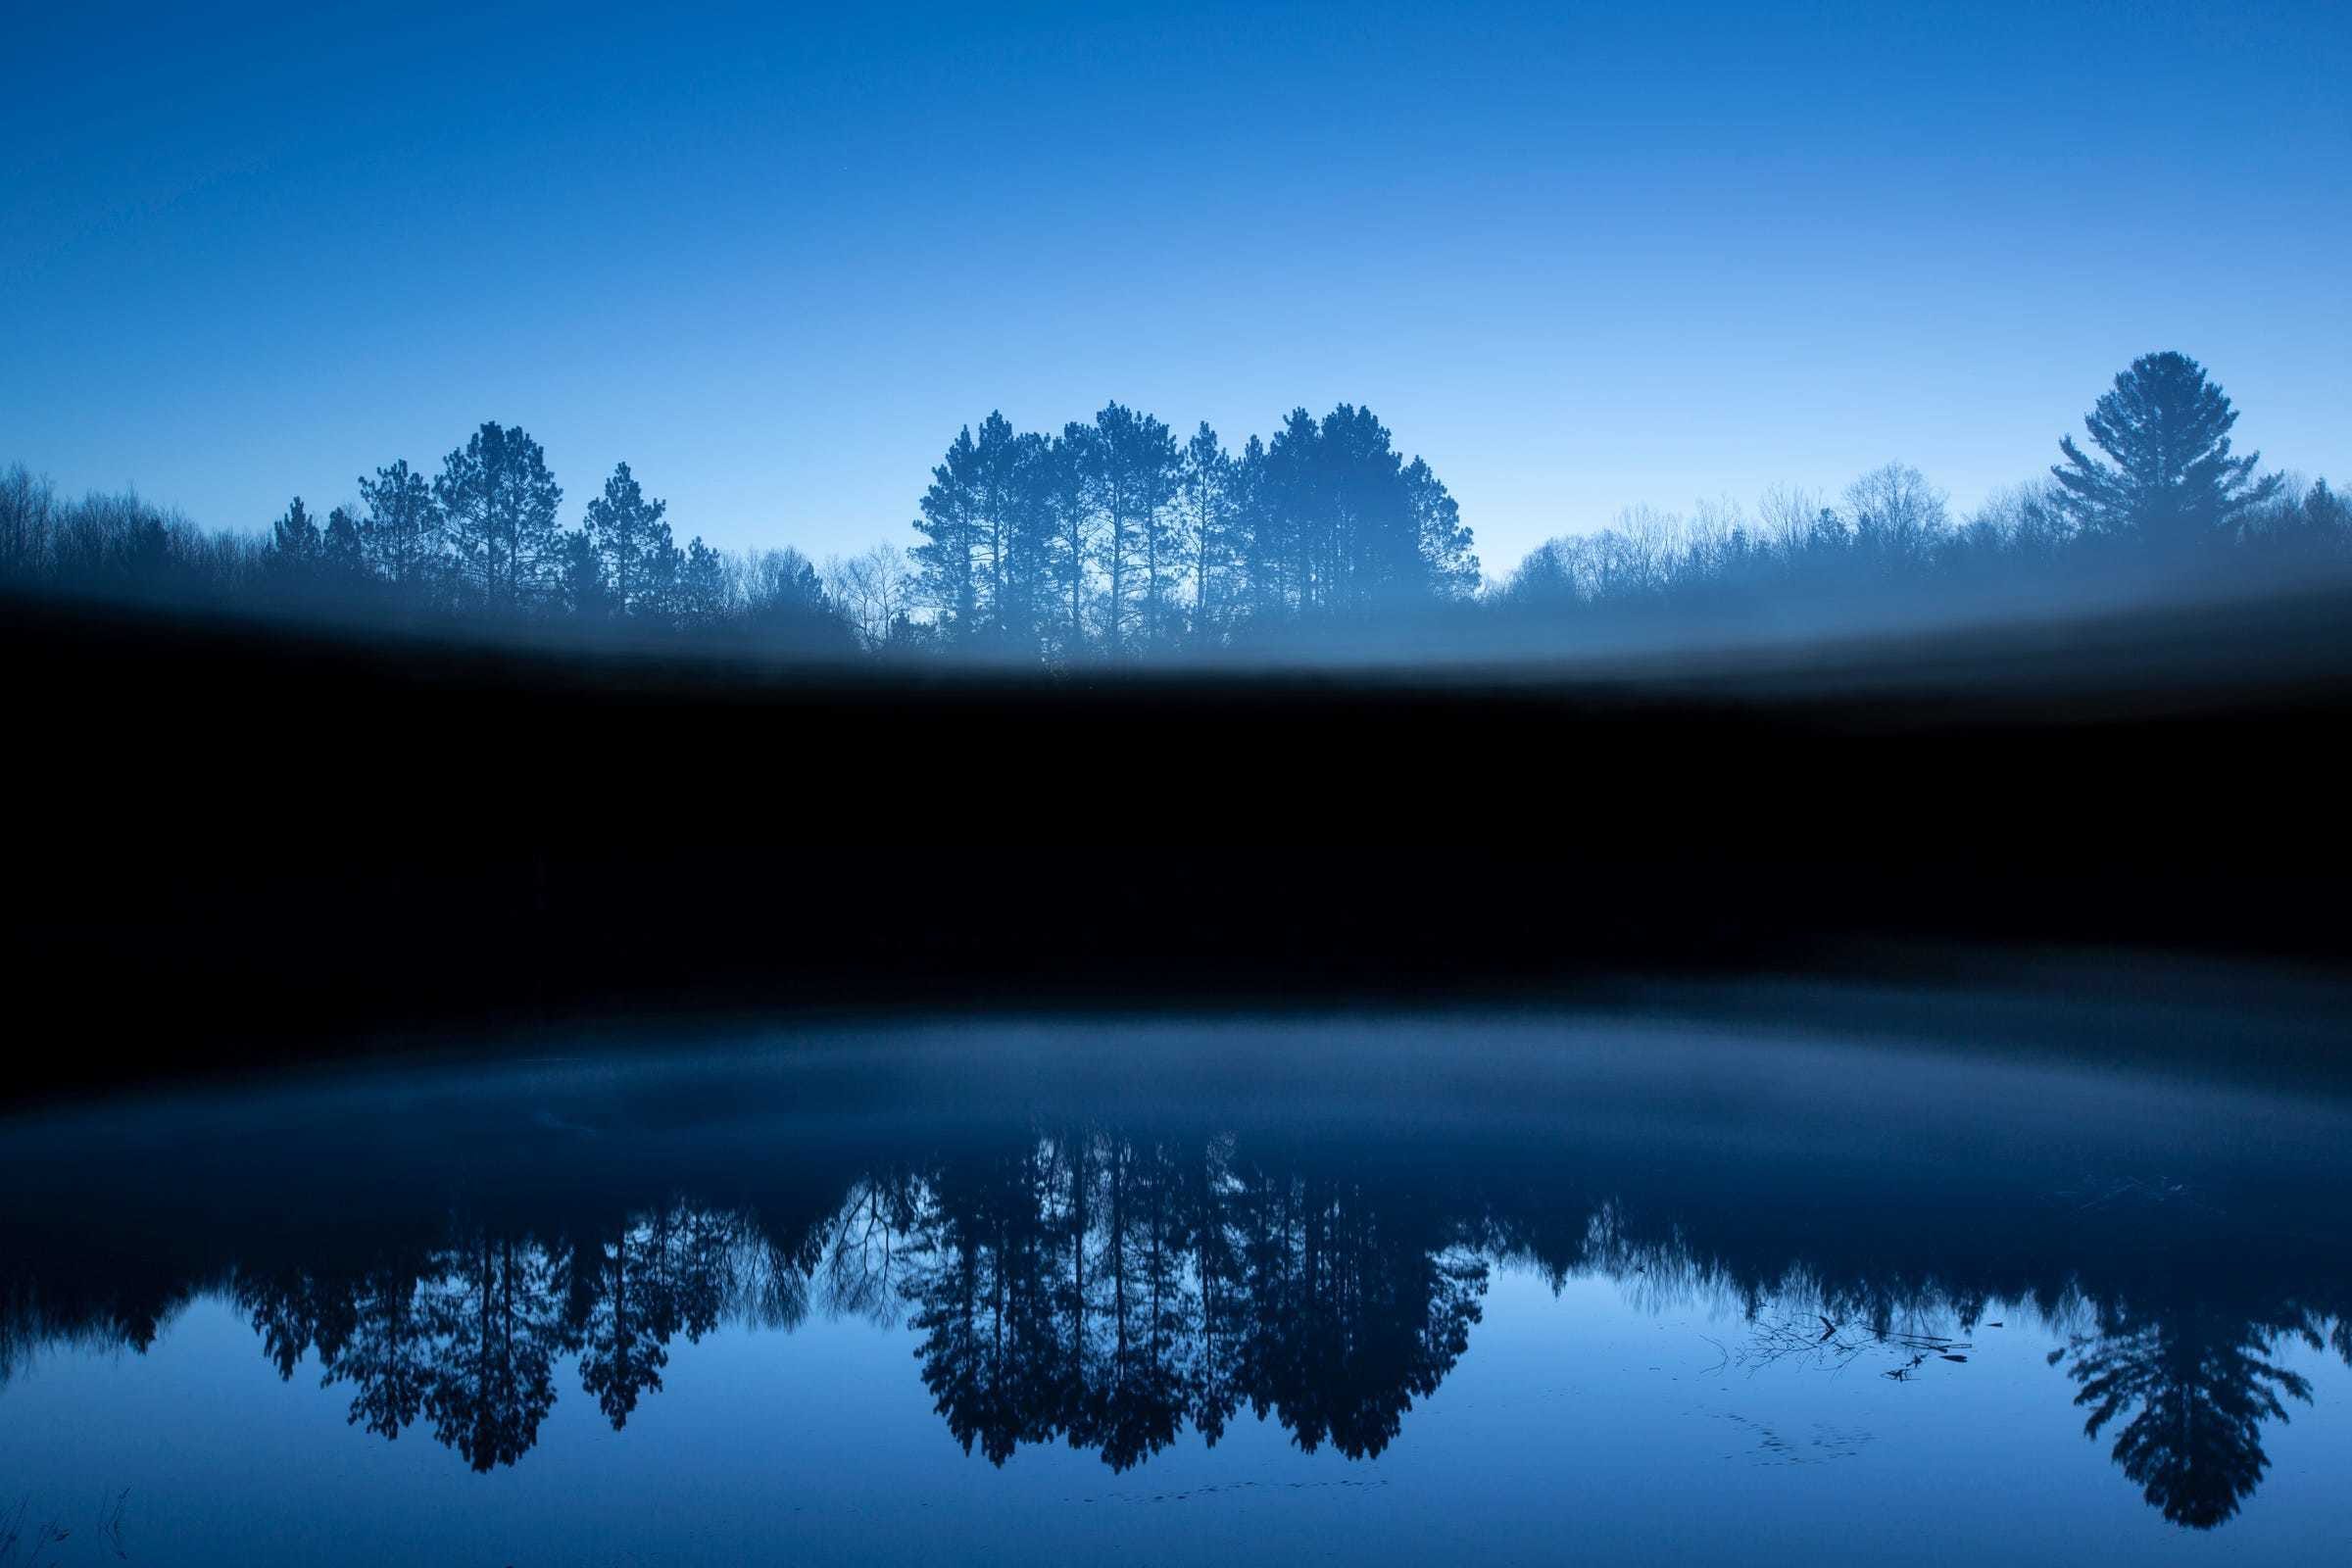 Dawn breaks over a small lake in Michigan's Huron National Forest on Wednesday, May 13, 2020. This single photograph was made with a shutter speed of 30 seconds. The photographer used a leather cover held over the front of the lens, lifting it briefly to expose multiple scenes.